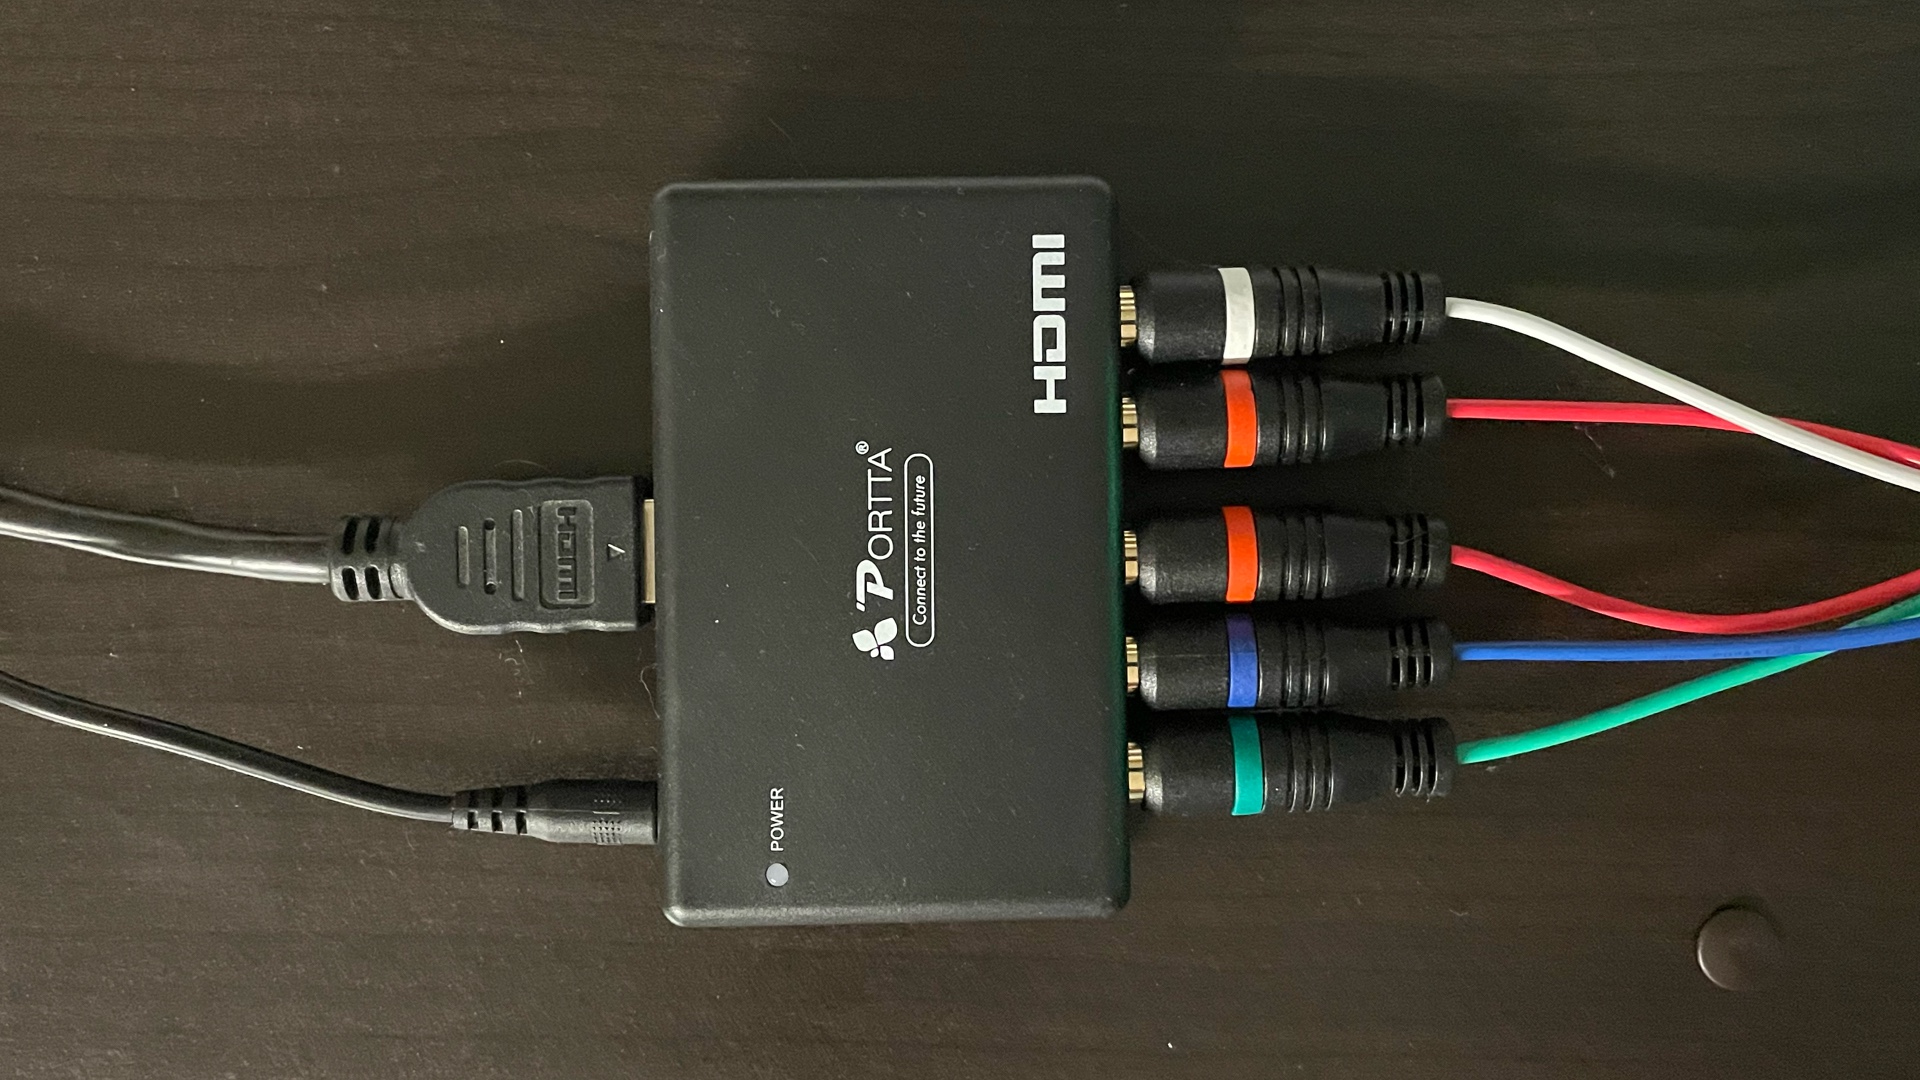 HDMI to Component converter